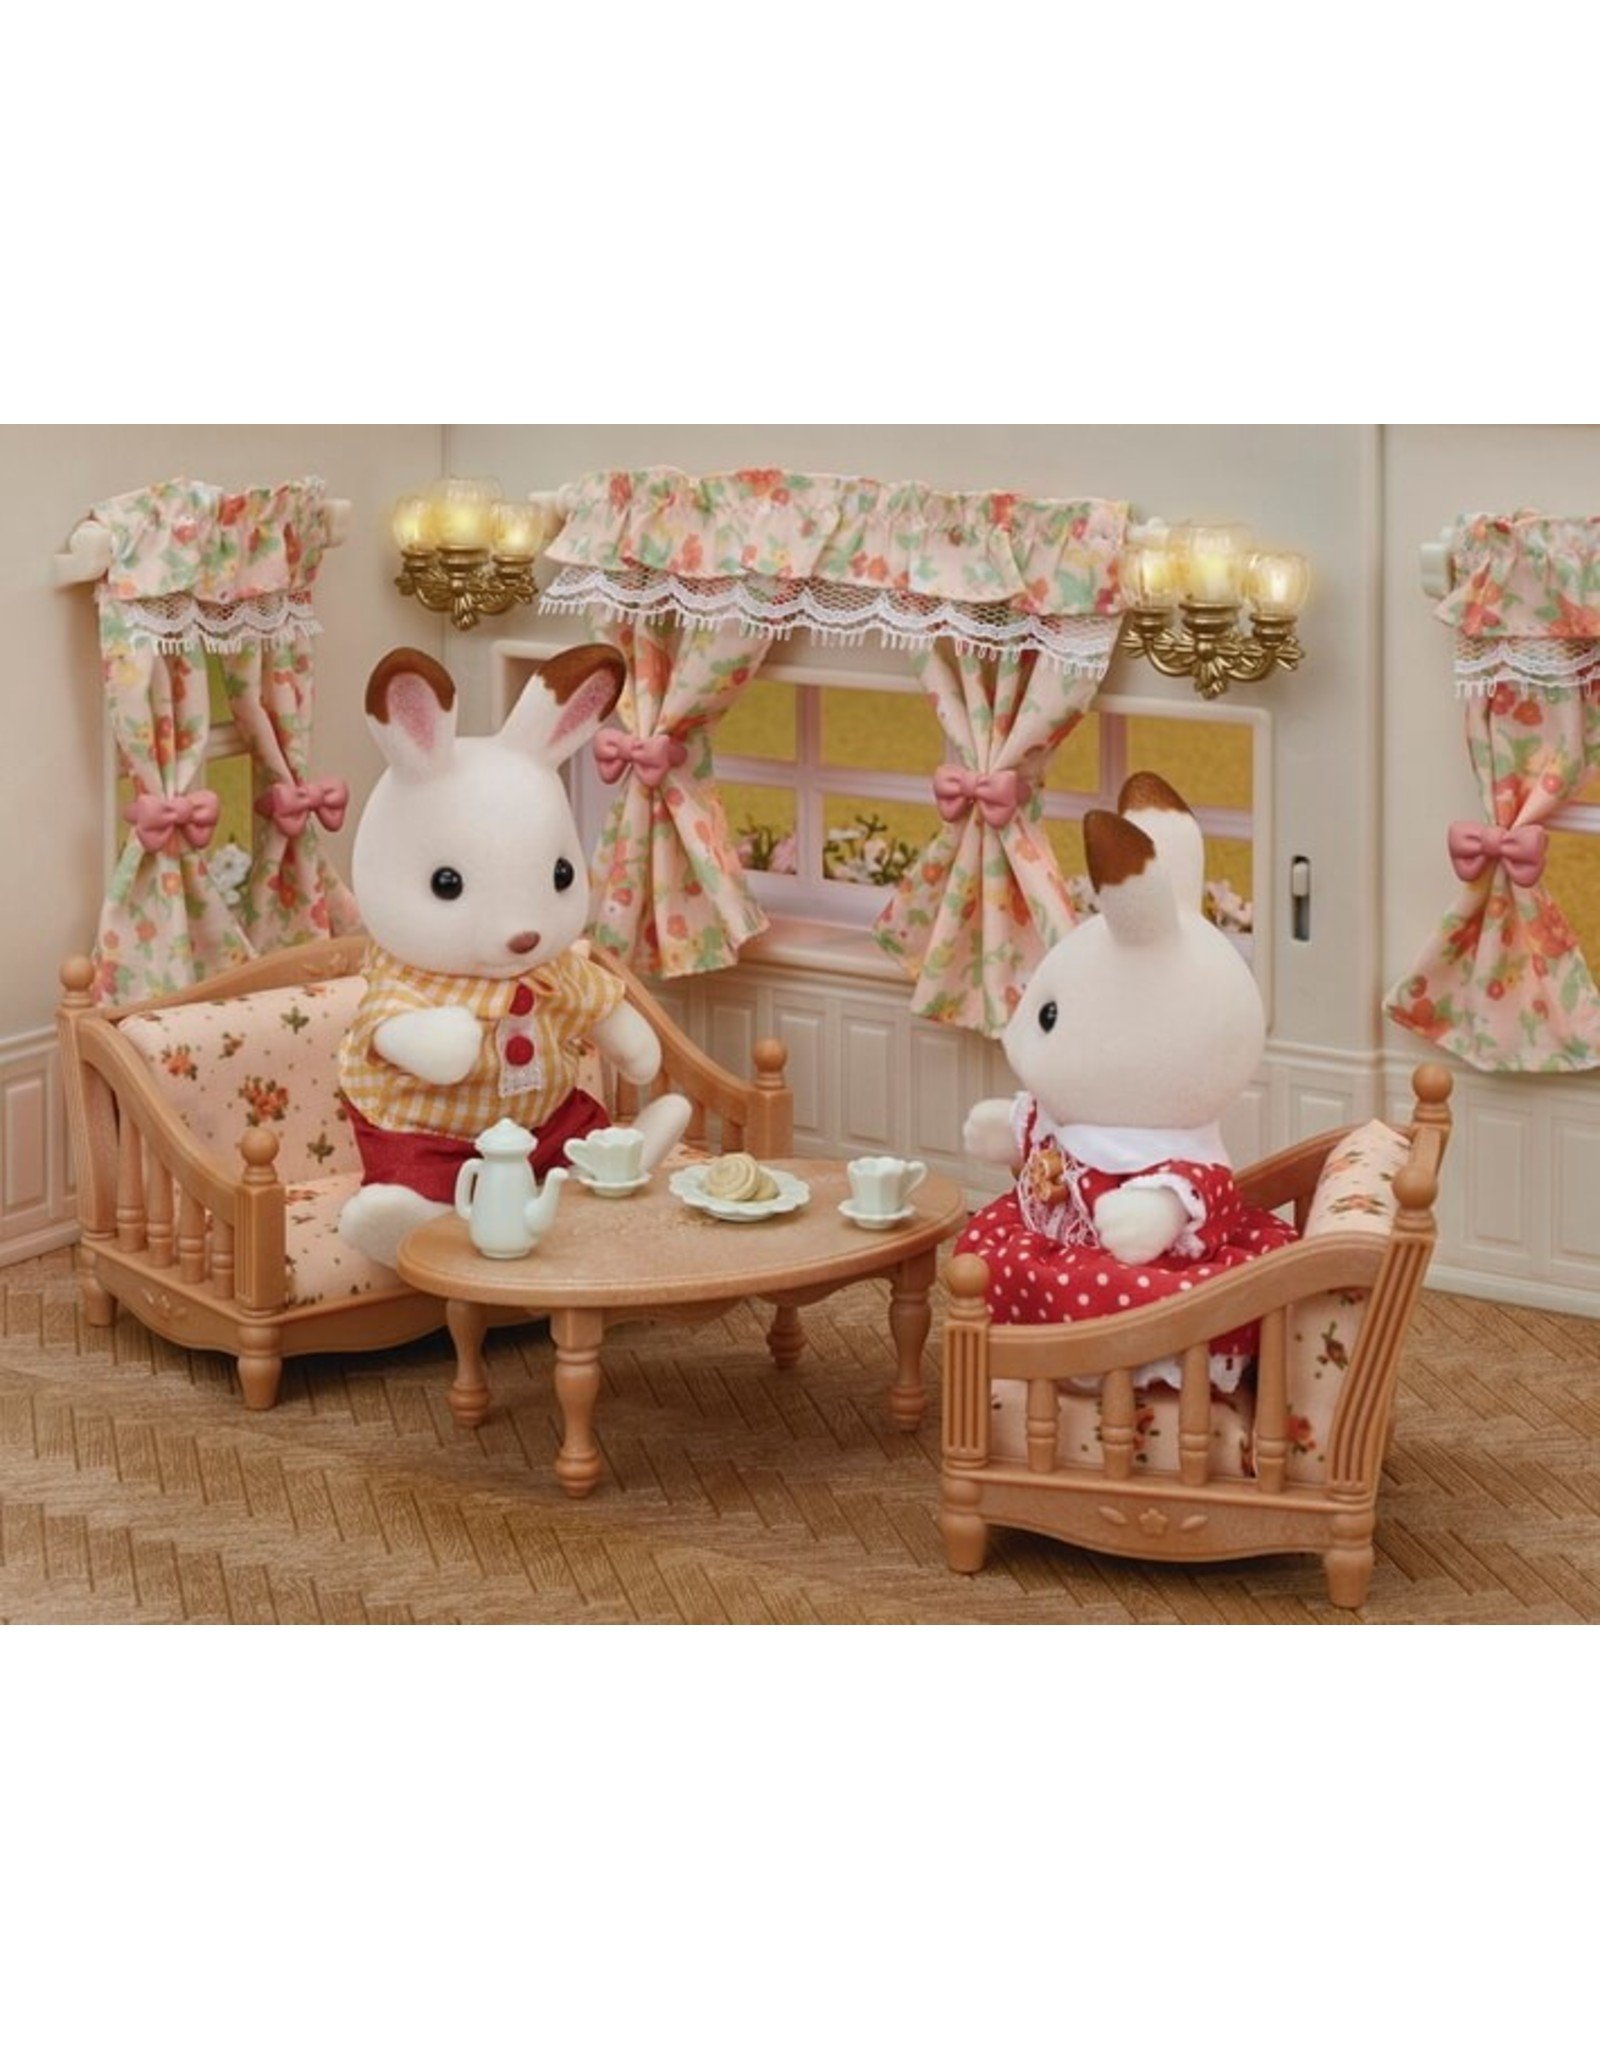 Calico Critters Calico Critters Wall Lamps & Curtains